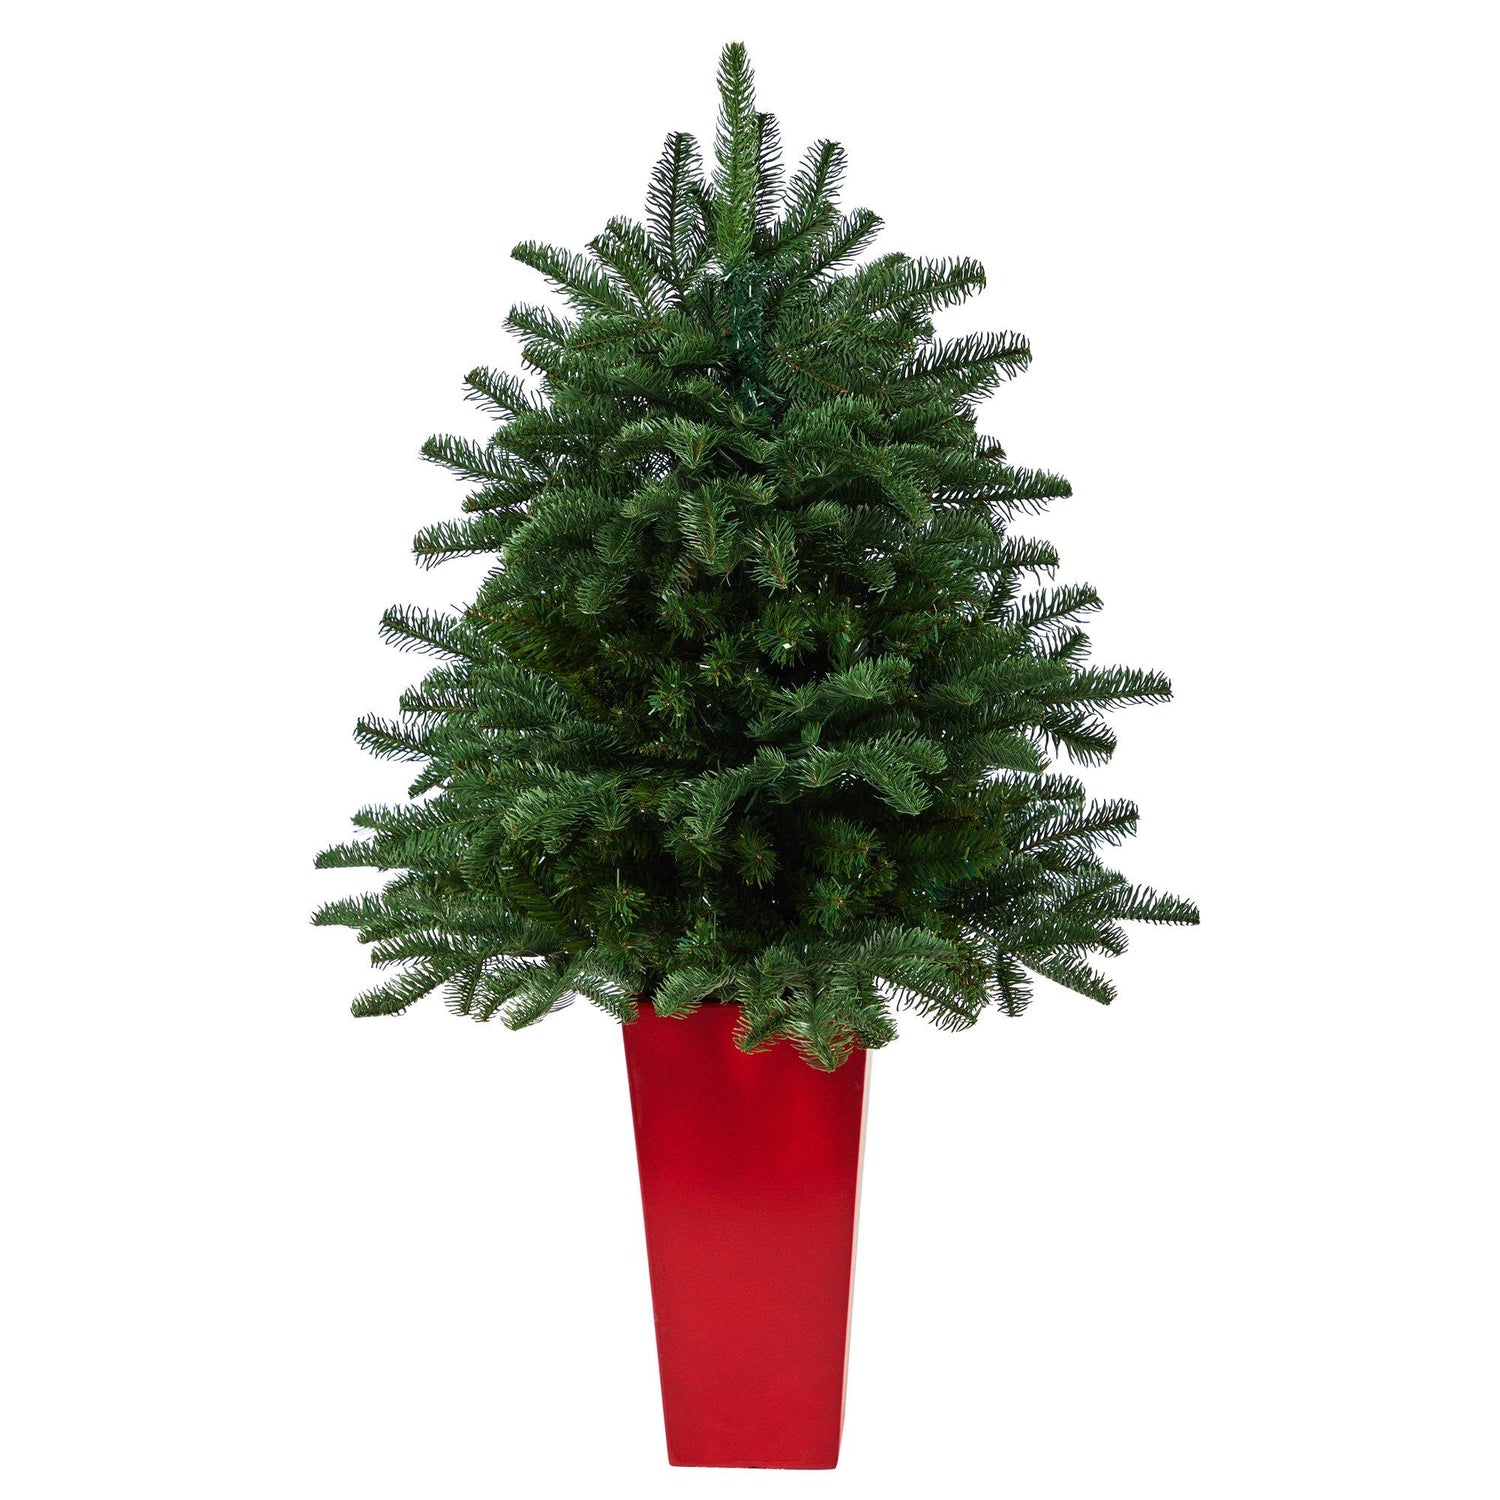 3.5’ South Carolina Spruce Artificial Christmas Tree with 458 Bendable Branches in Red Tower Planter